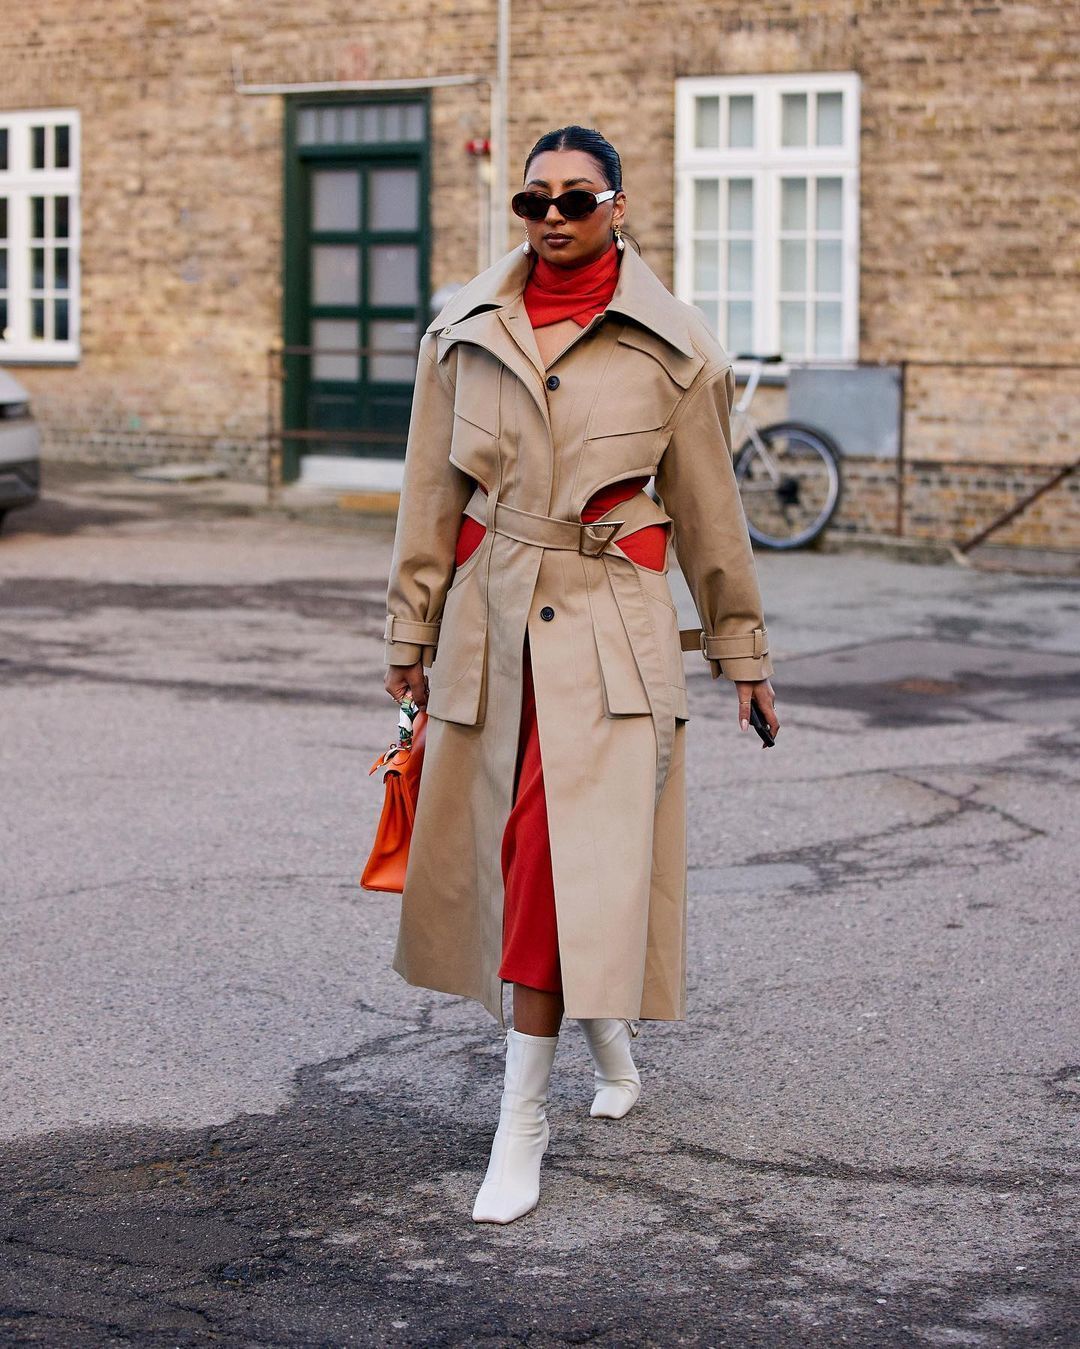 Stylish top: coats, jackets and trench coats in autumn looks 12